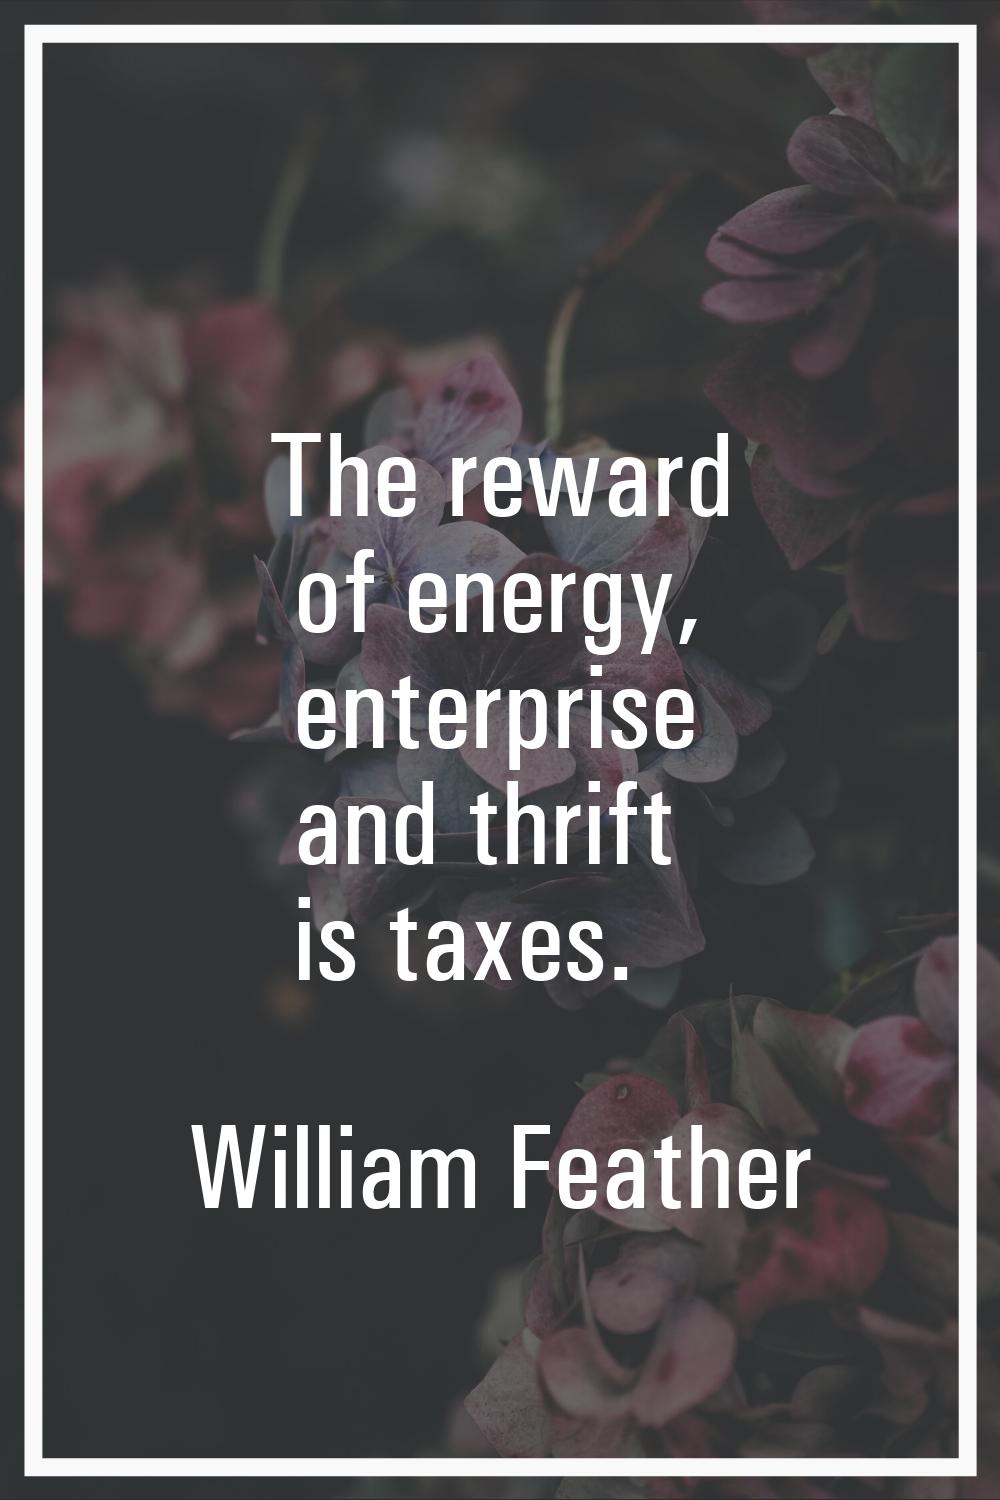 The reward of energy, enterprise and thrift is taxes.